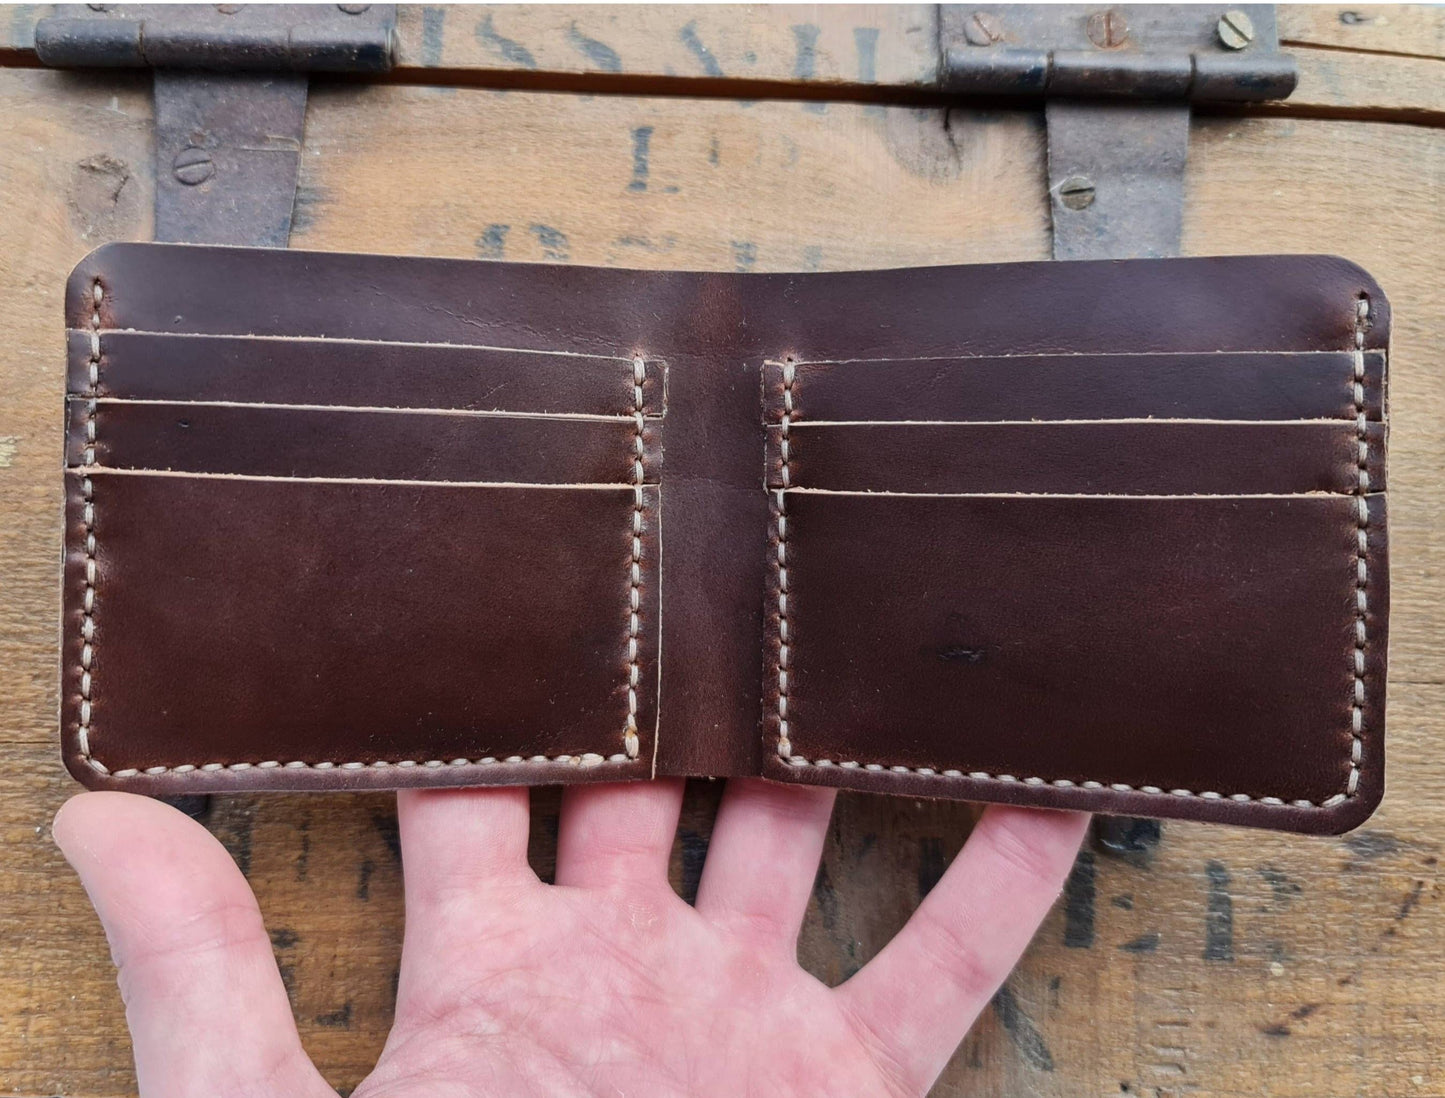 No. 2 Frontiersman Leather Bifold Wallet, Horween Brown Chromexcel Leather, Front Open